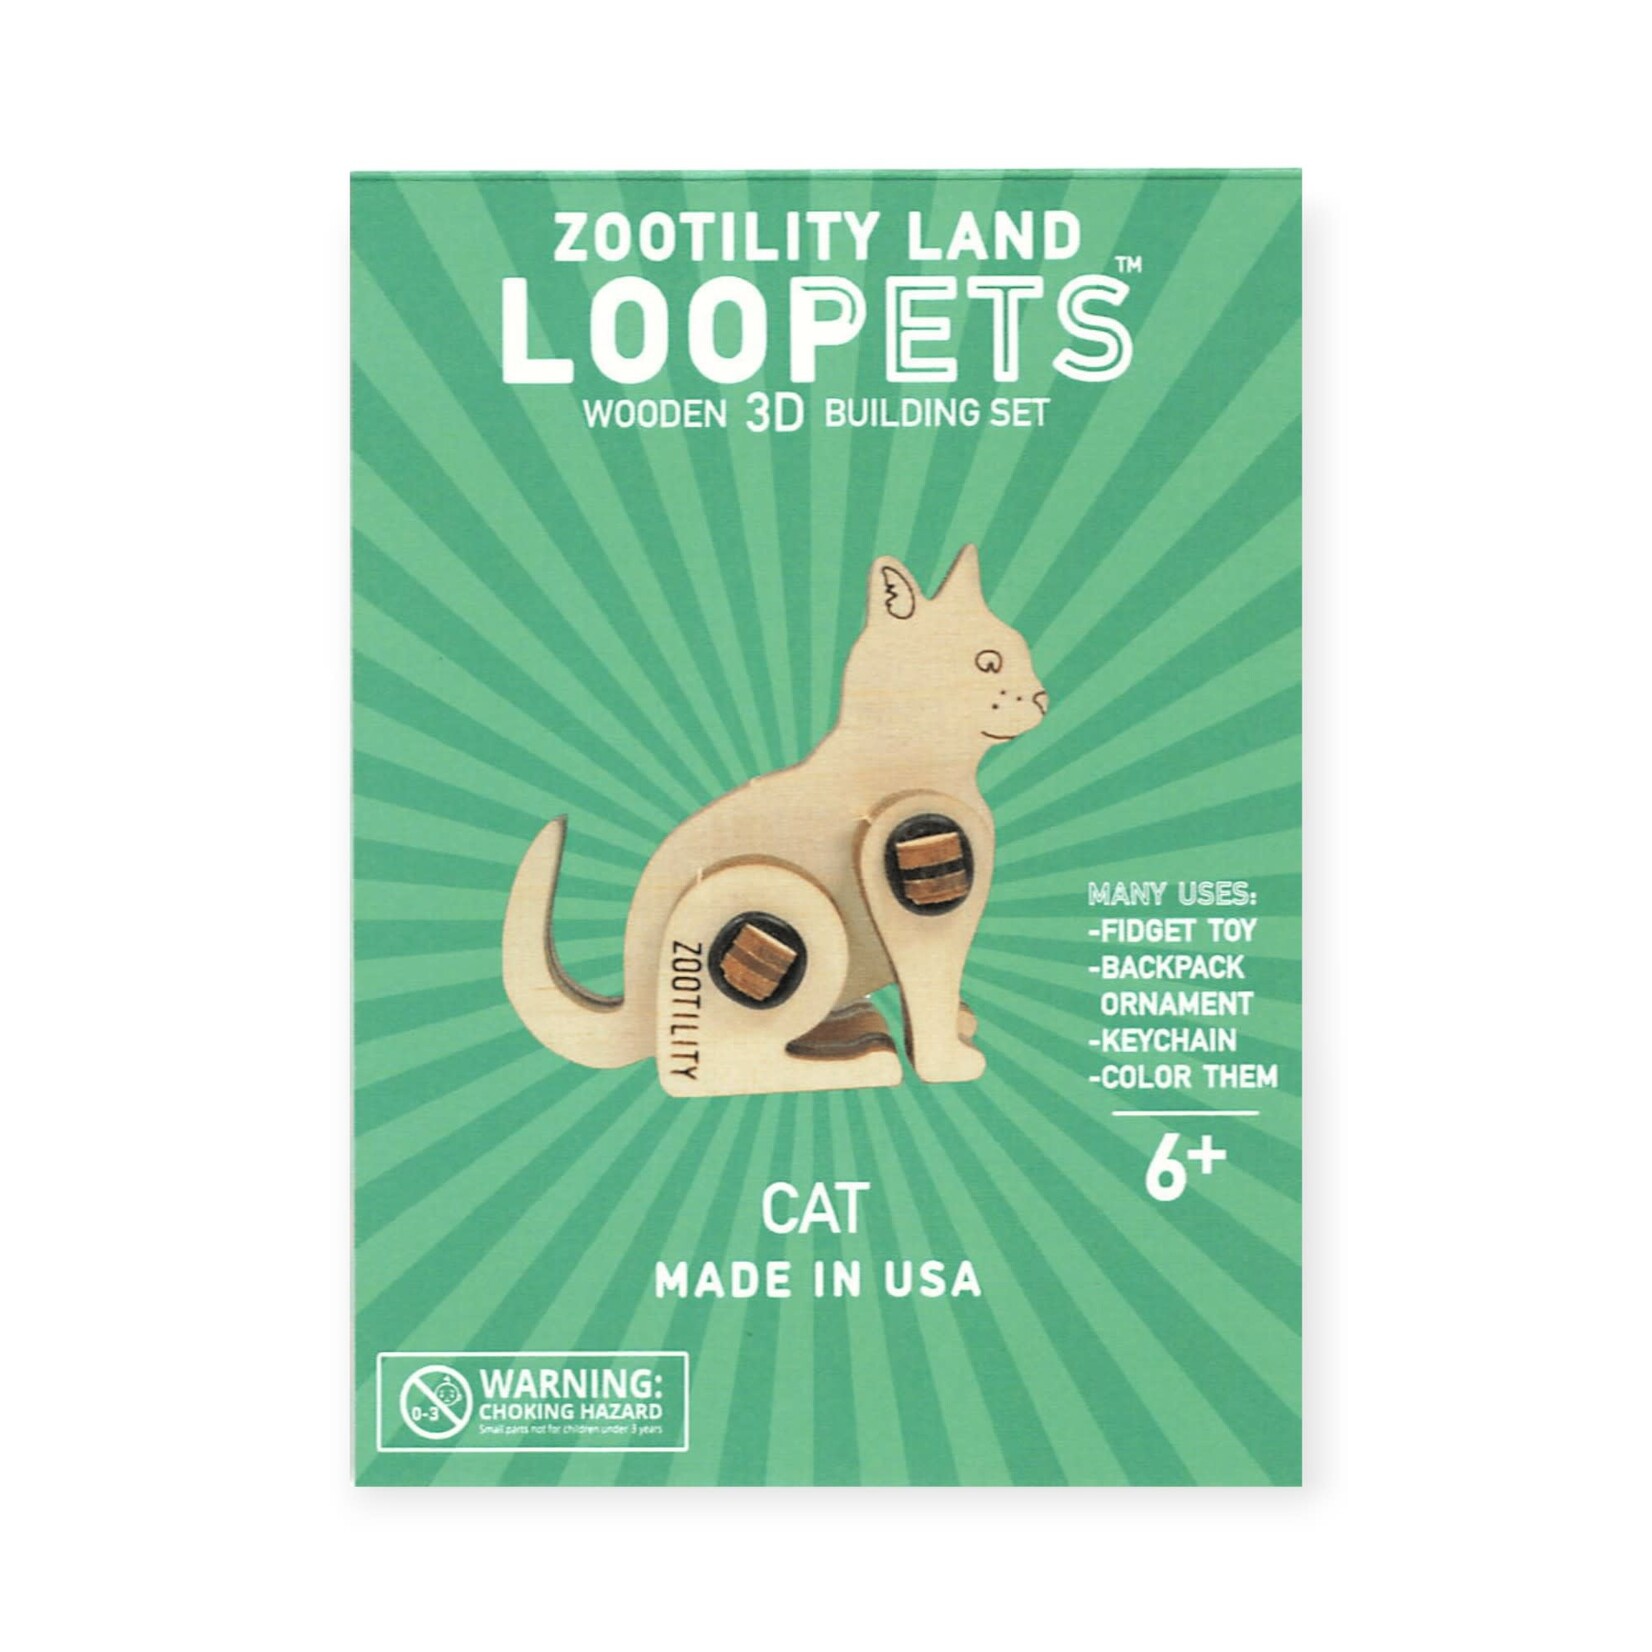 Zootility Tools Loopets 3D Building Set